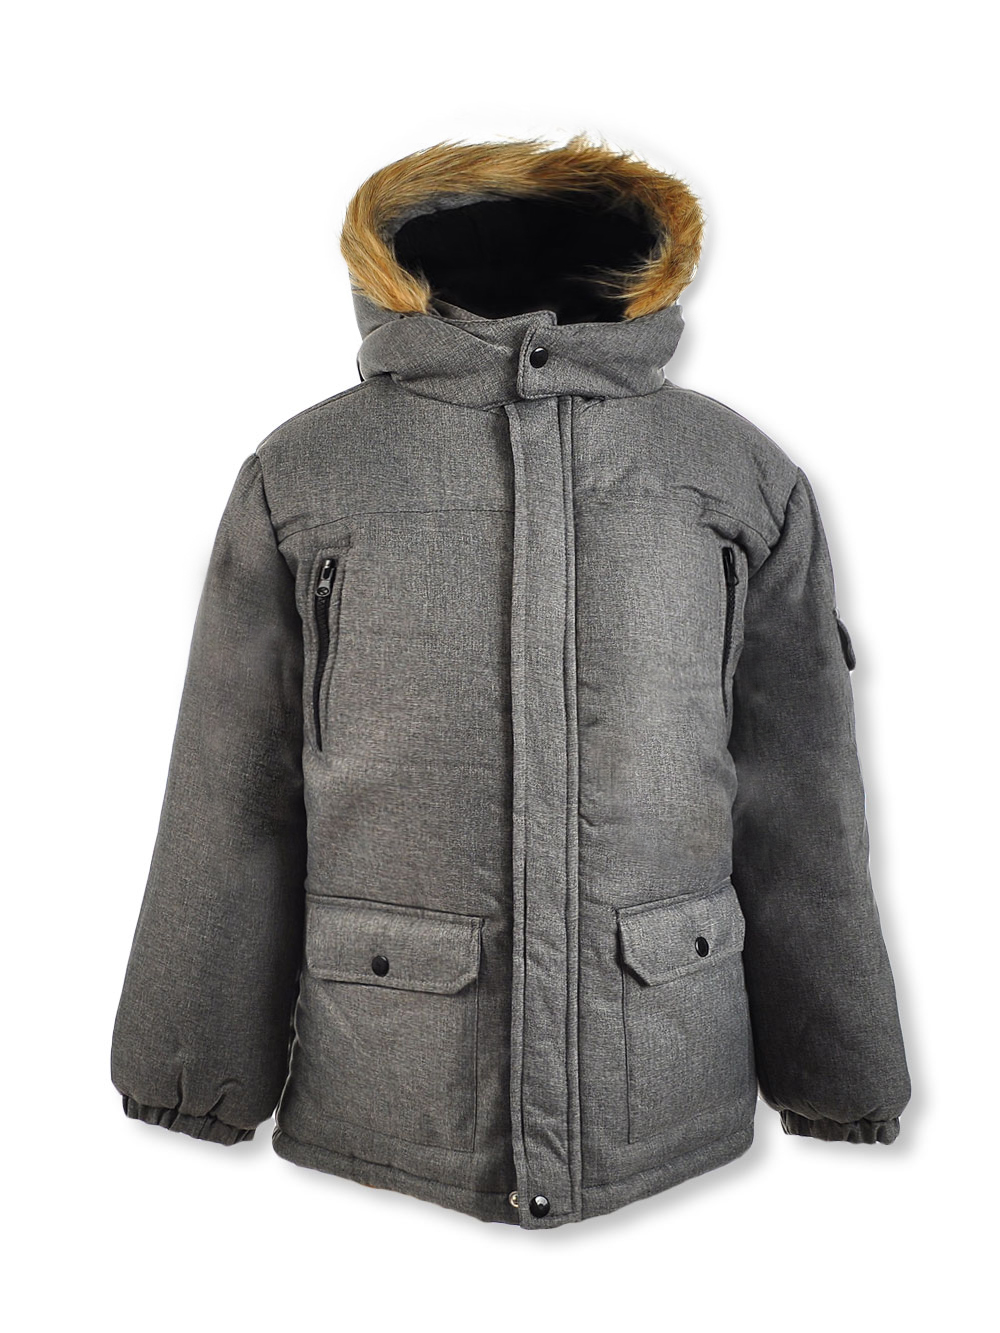 Size m10-12 Jackets Coats for Boys